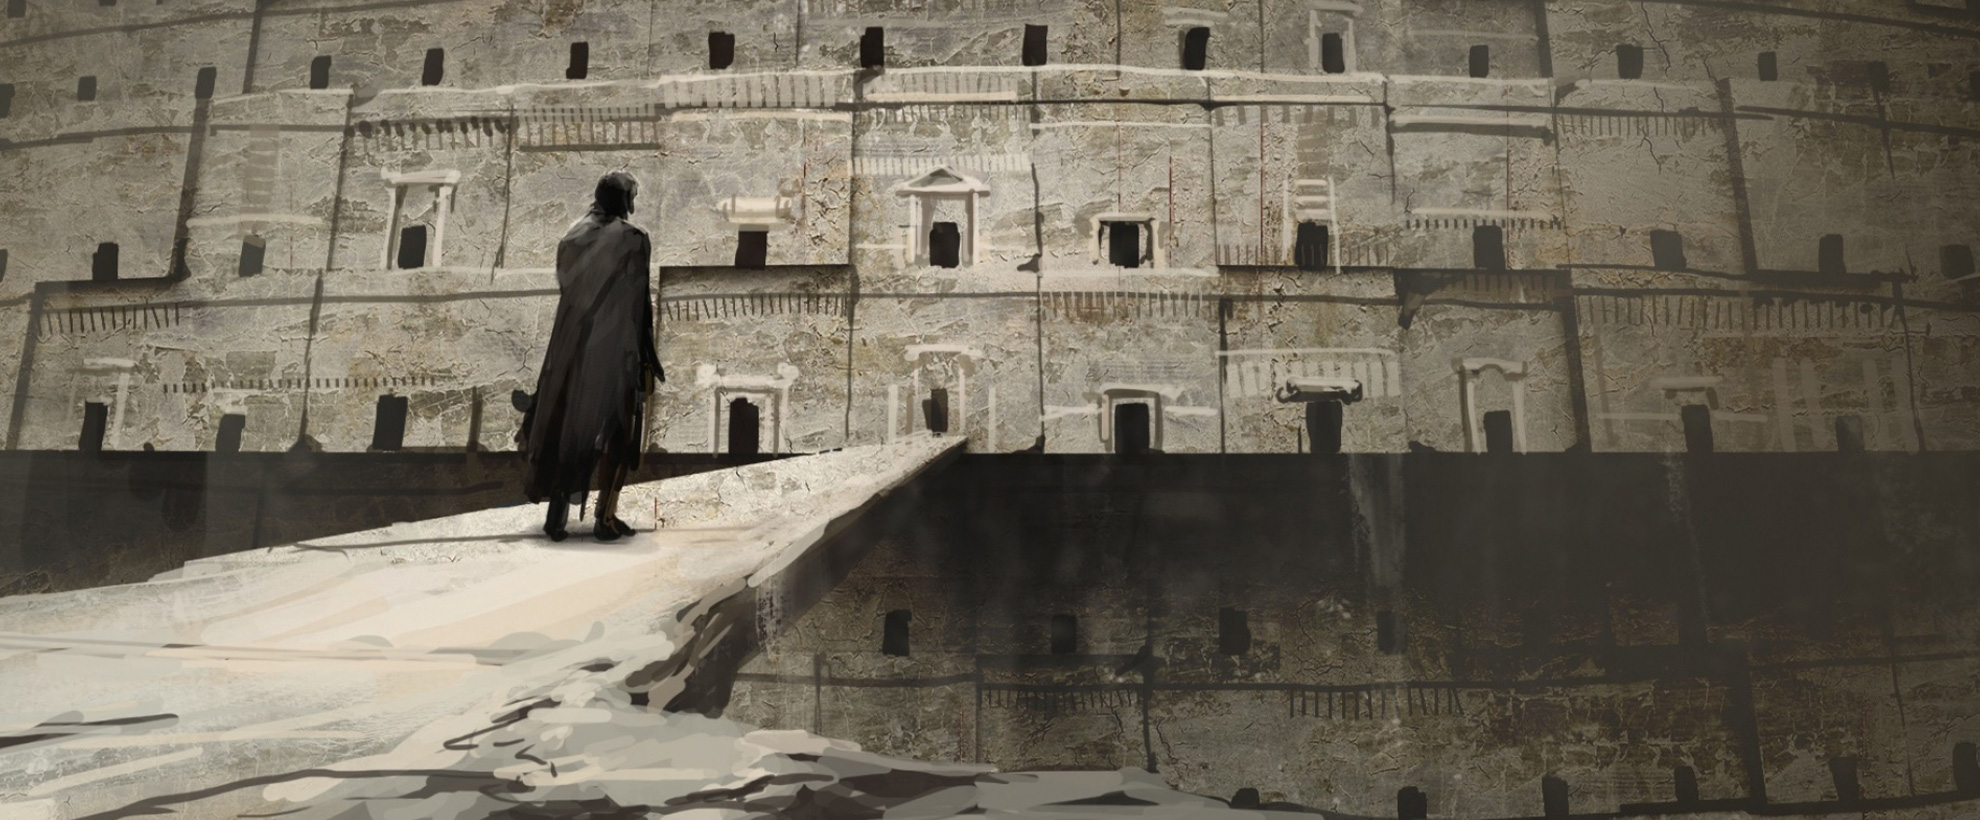 Concept art for the wrath of the titans, a man dressed all in black approaches a large stone building with lots of layers and small windows